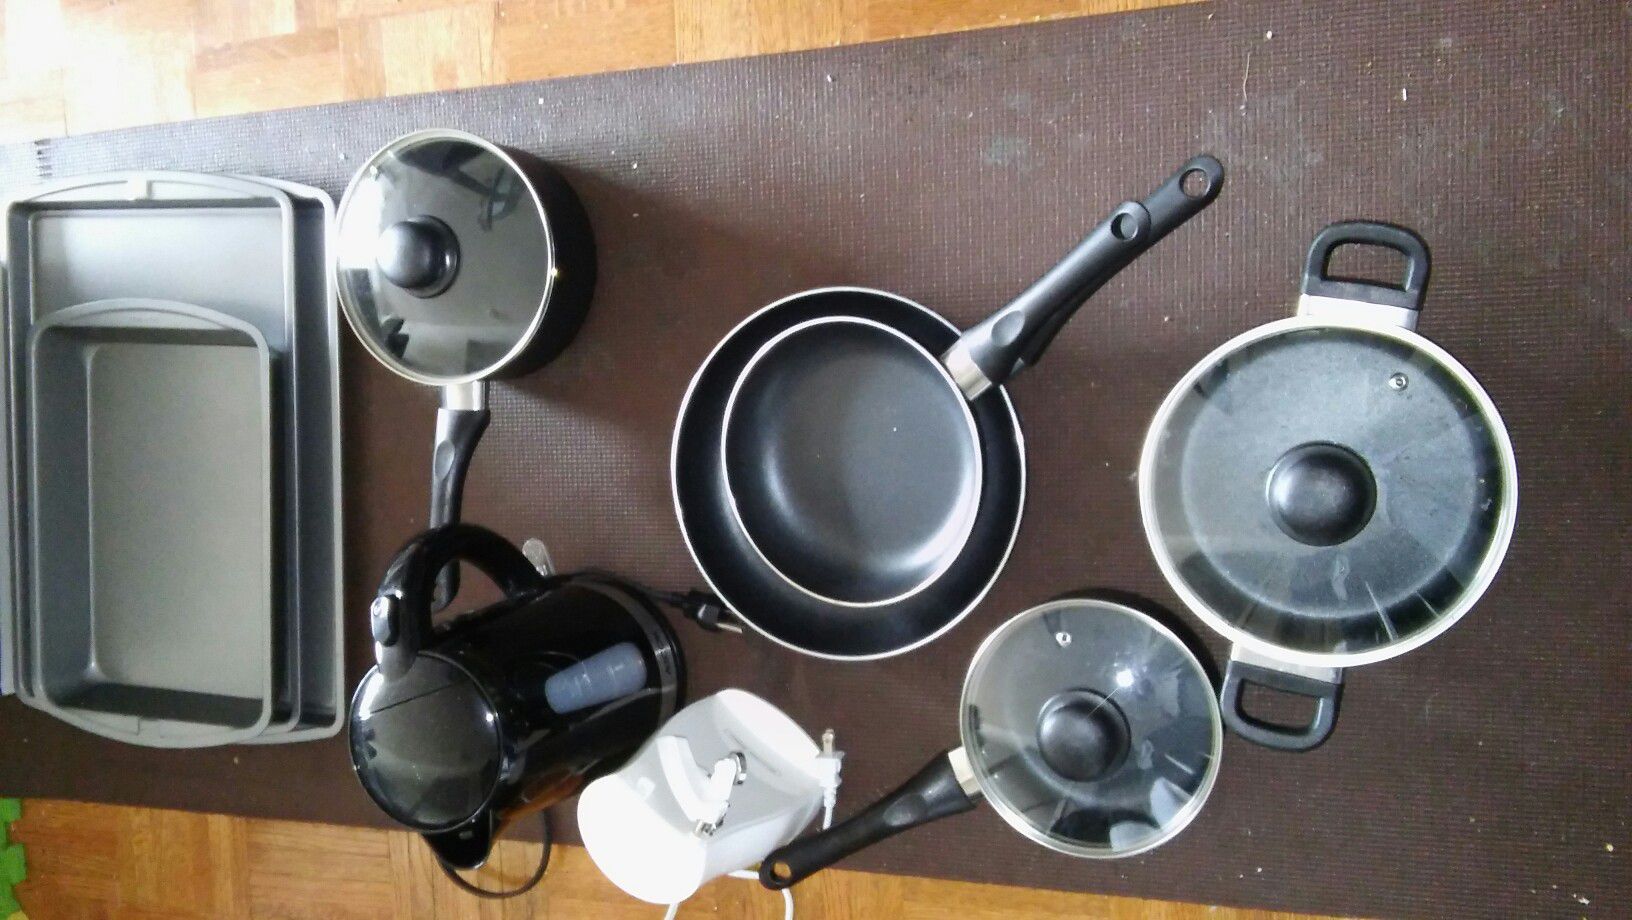 Pots, Pans, Baking Sheets, Electric Can Opener & Water Boiler